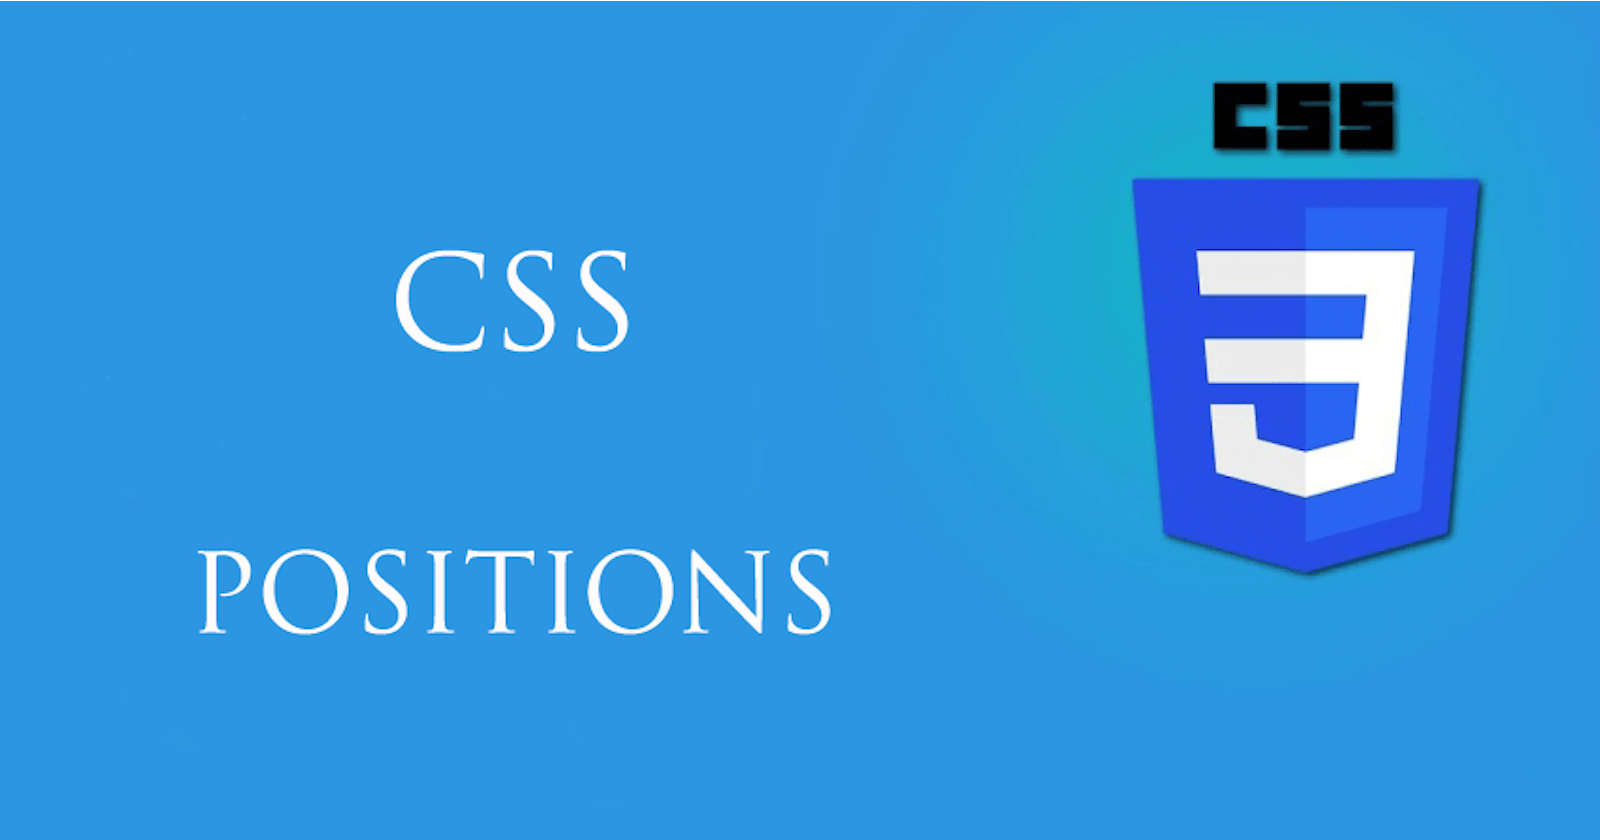 CSS - The Position Property